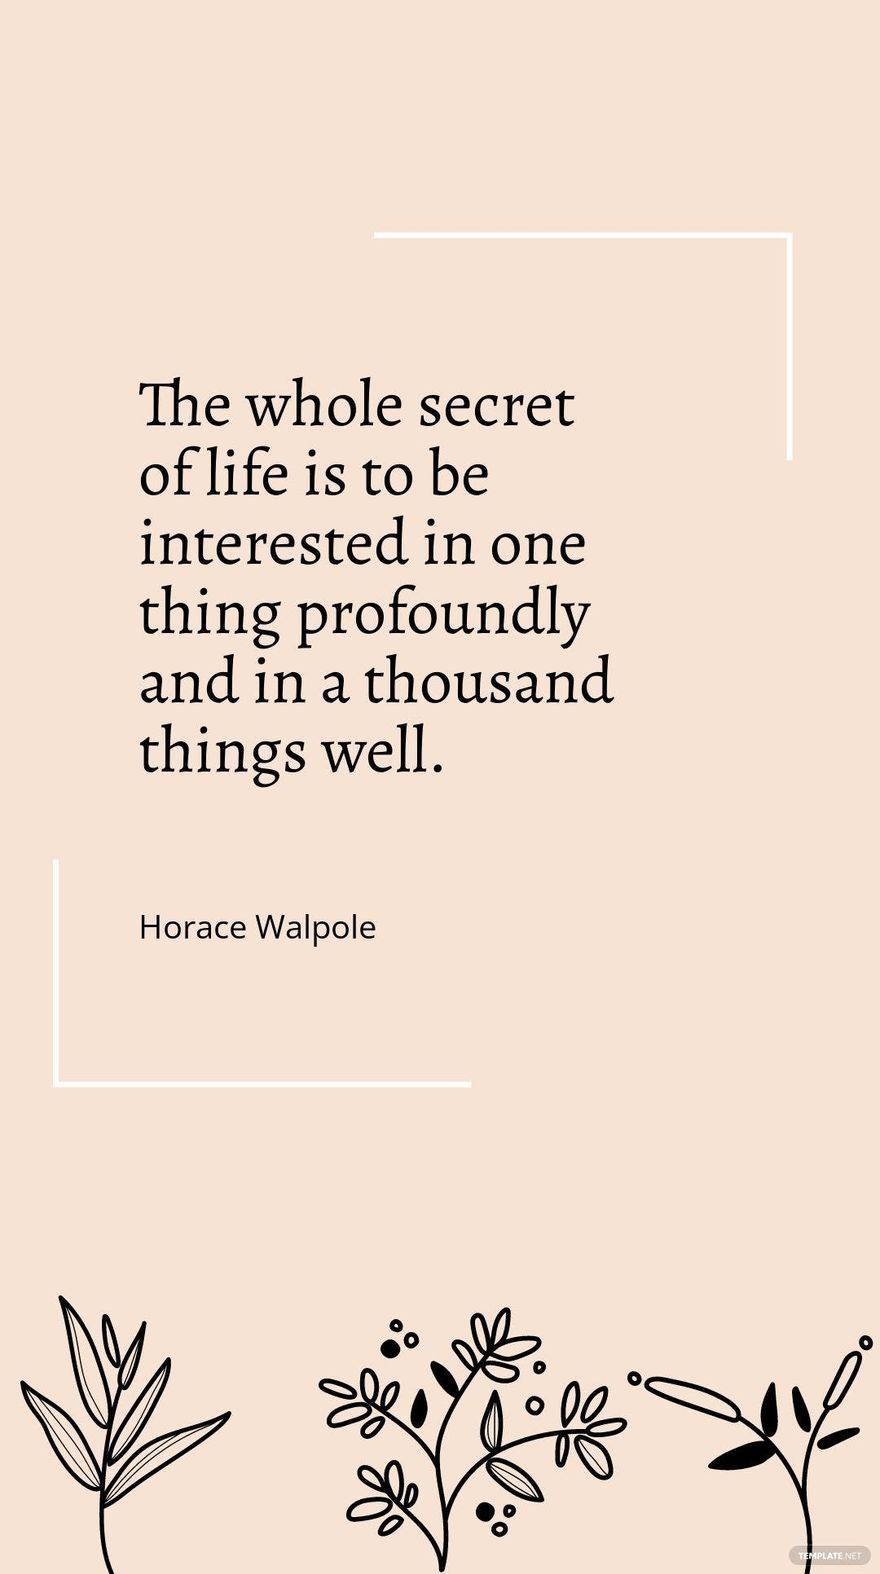 Horace Walpole - "The whole secret of life is to be interested in one thing profoundly and in a thousand things well."